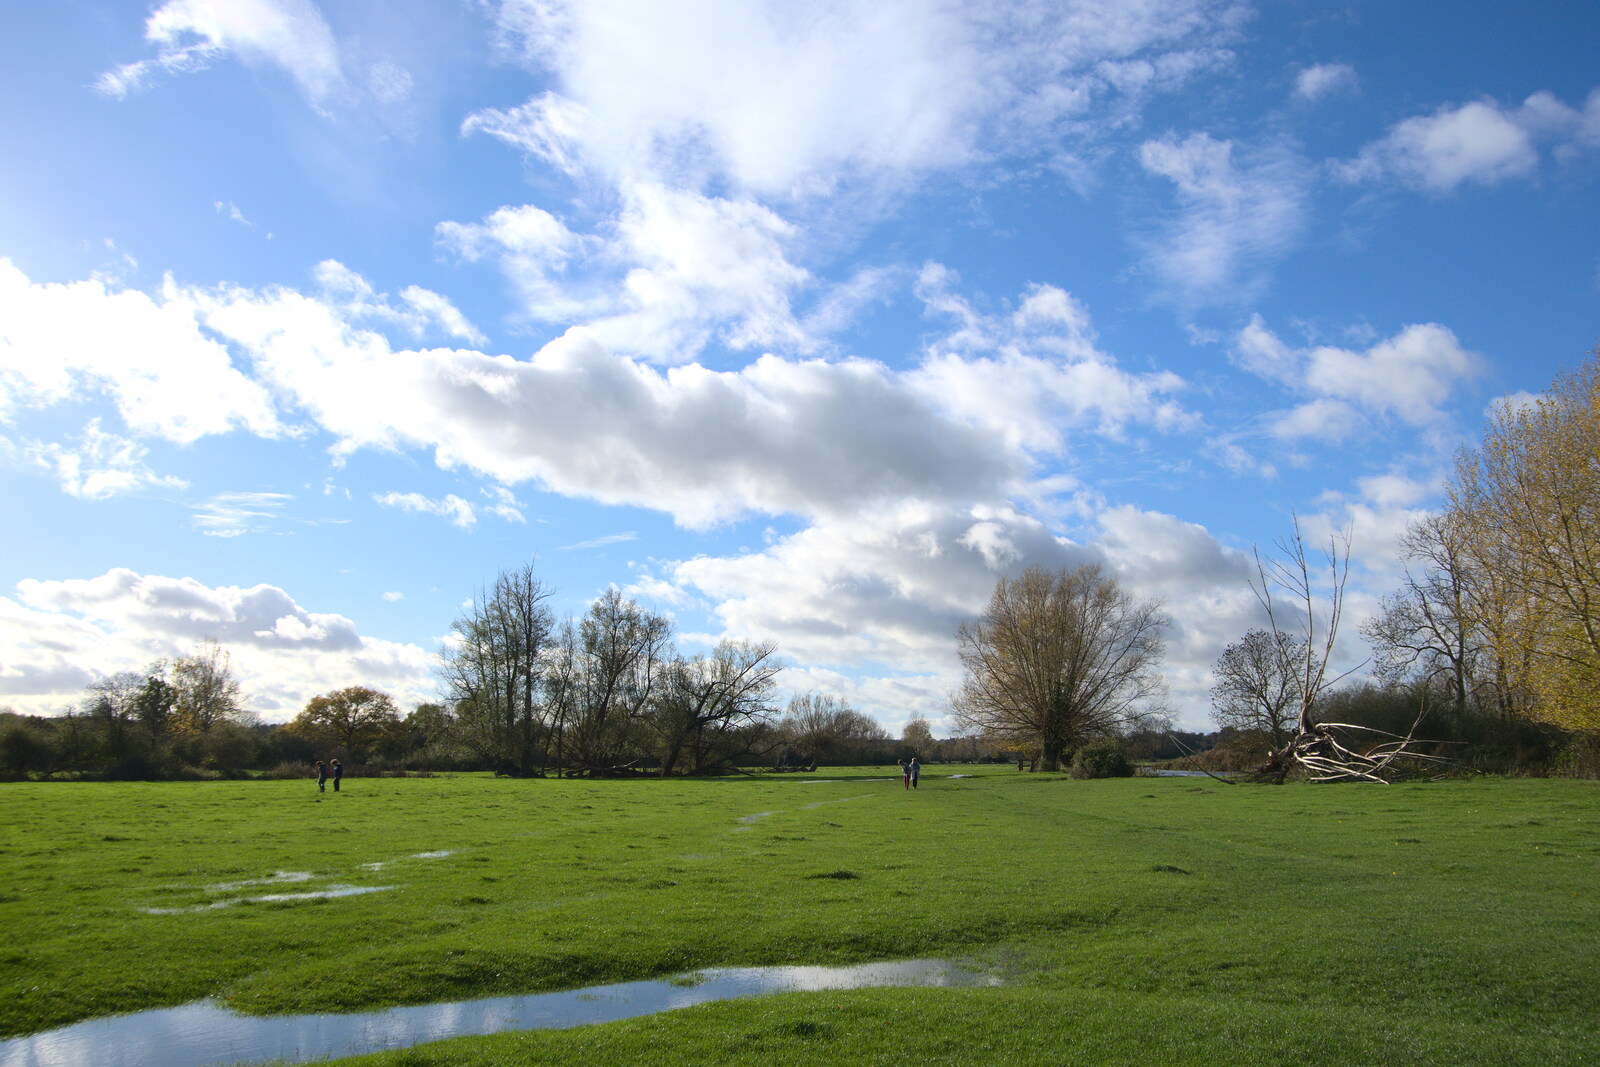 A Postcard from Flatford and Dedham, Suffolk and Essex, 9th November 2022: The view towards Dedham 